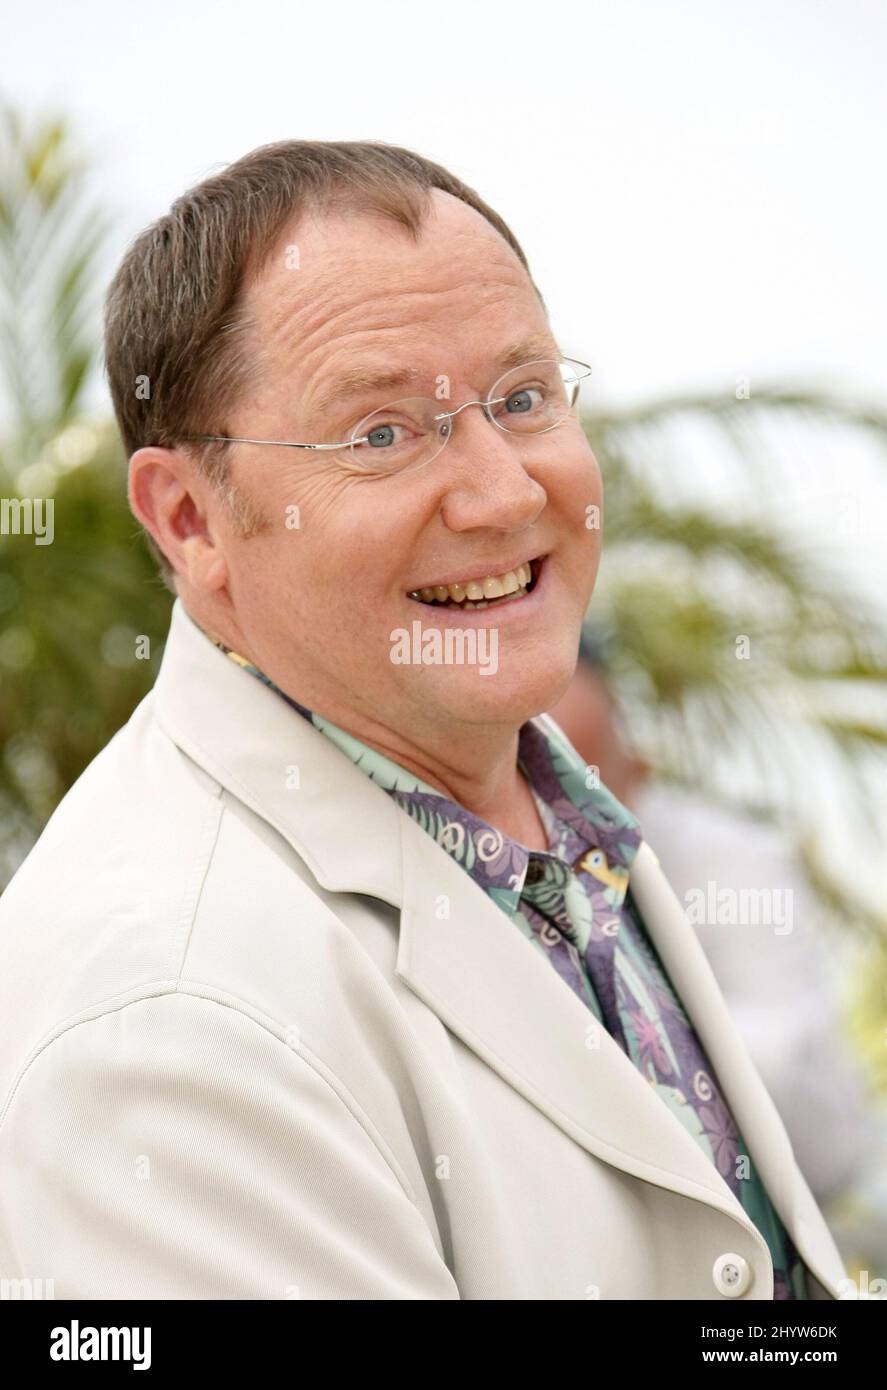 John Lasseter at the photocall for Up, part of the 62nd Festival de Cannes, Palais De Festival, Cannes. Stock Photo